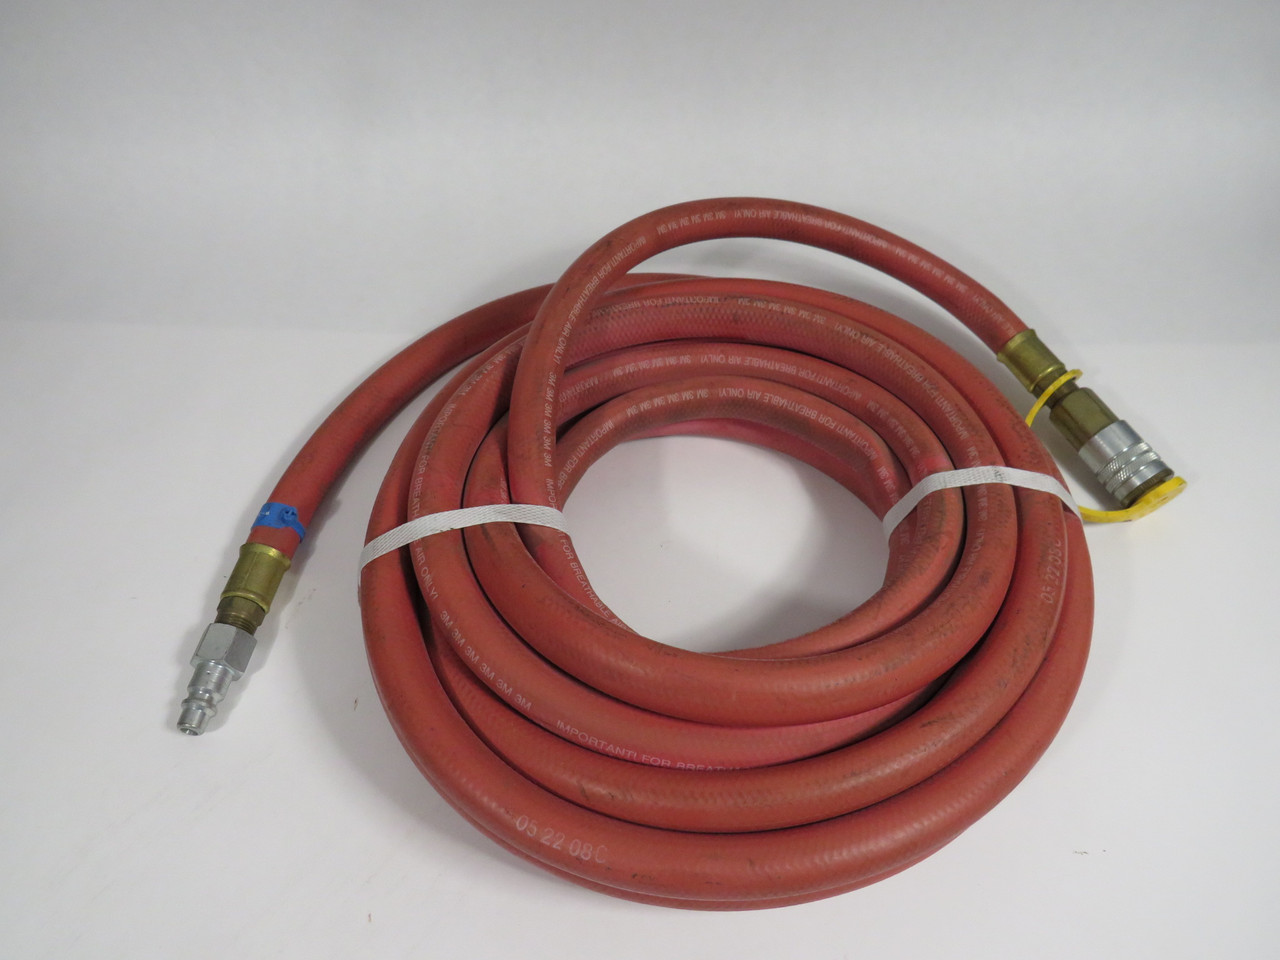 3M W-3020-25 Supplied Air Hose 1/2"ID 25Ft USED